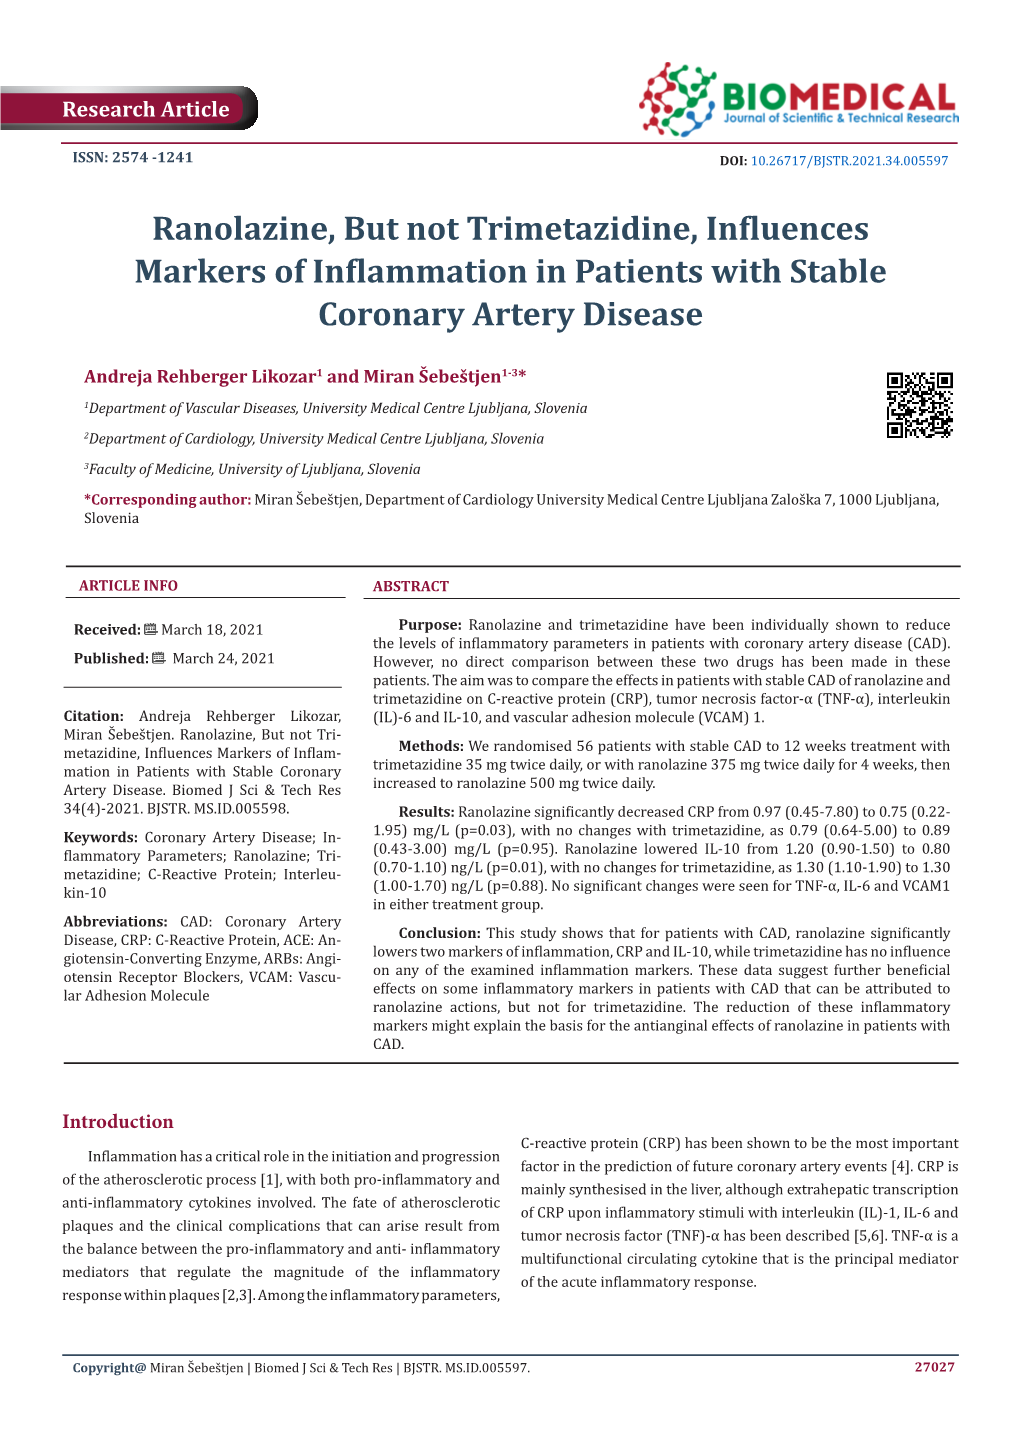 Ranolazine, but Not Trimetazidine, Influences Markers of Inflammation in Patients with Stable Coronary Artery Disease